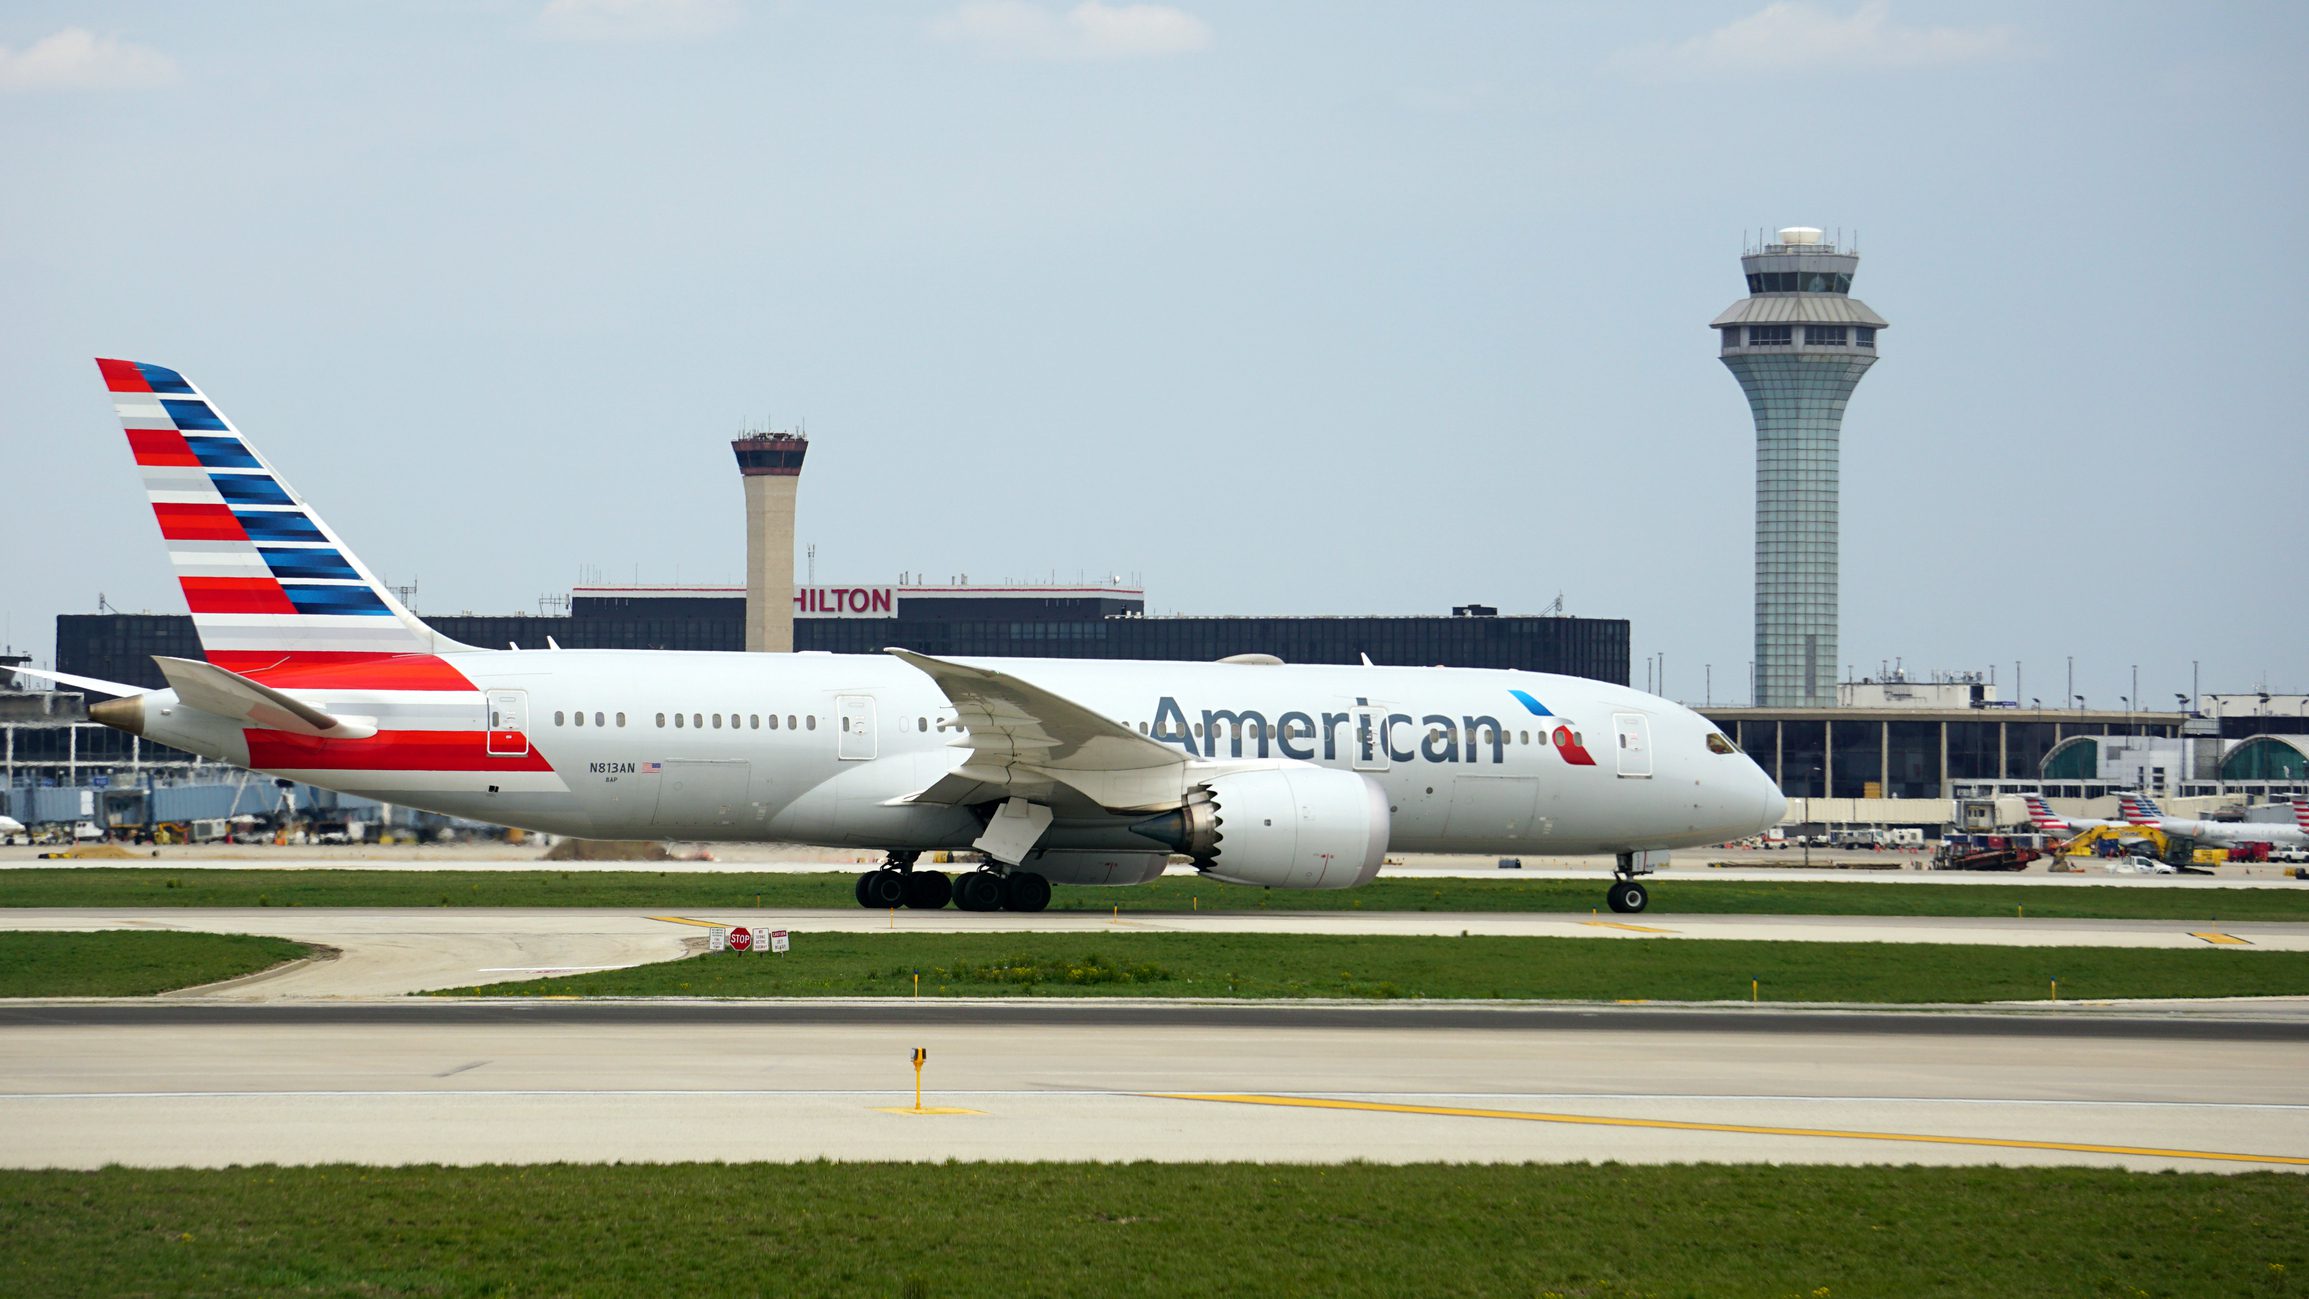 American Airlines Boeing 787 Dreamliner Lands at Chicago O'Hare